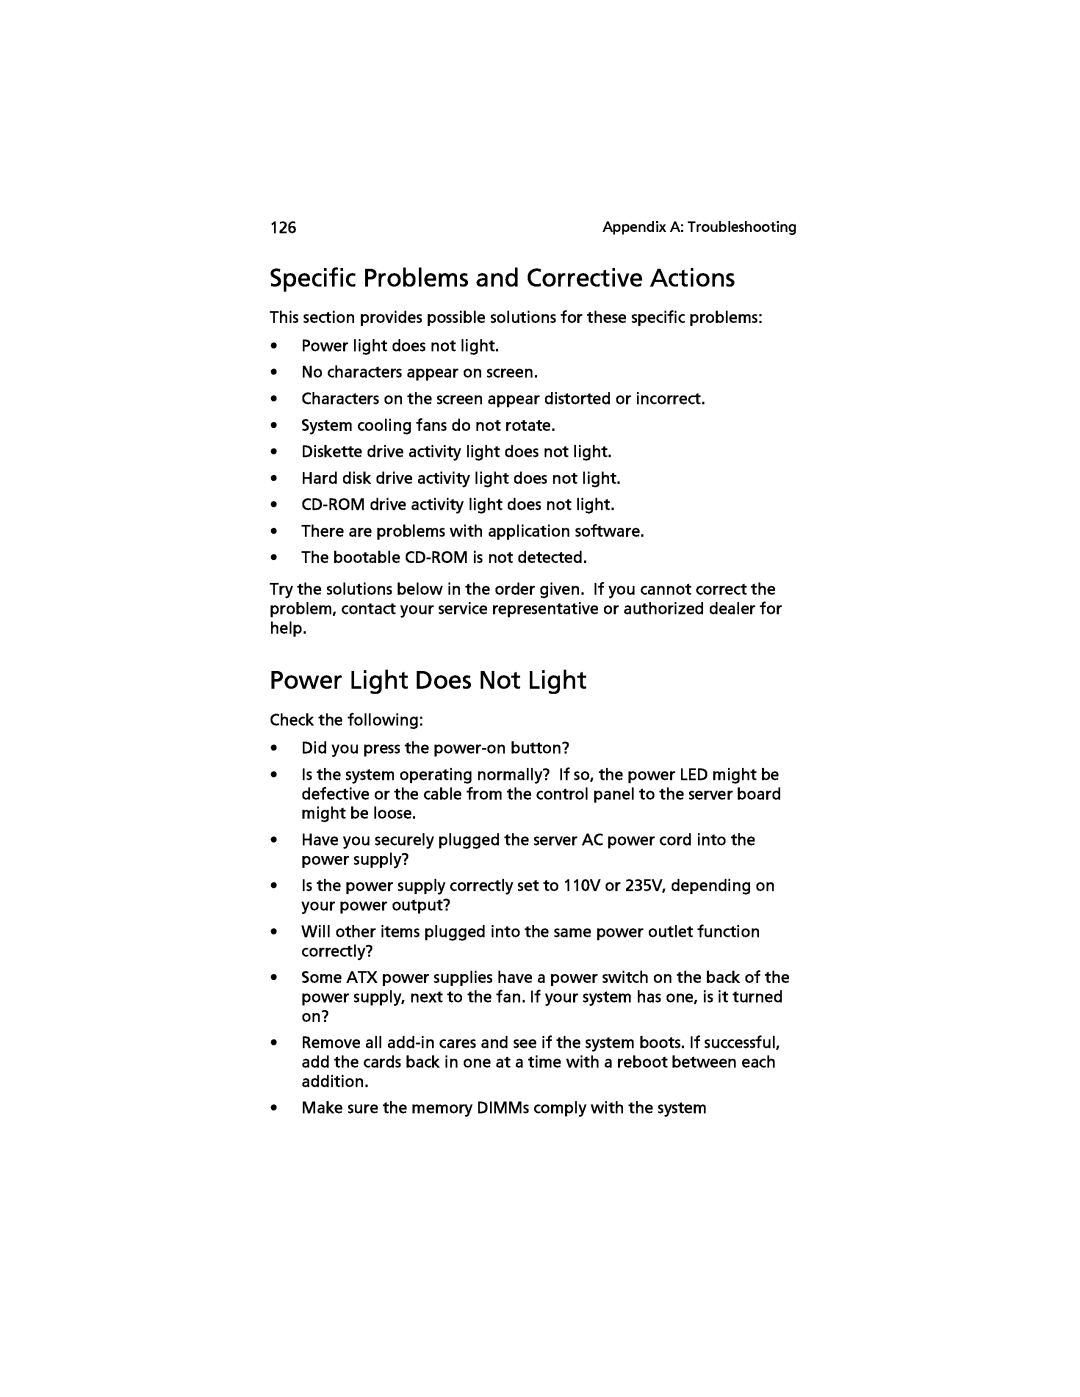 Acer G520 series manual Specific Problems and Corrective Actions, Power Light Does Not Light 